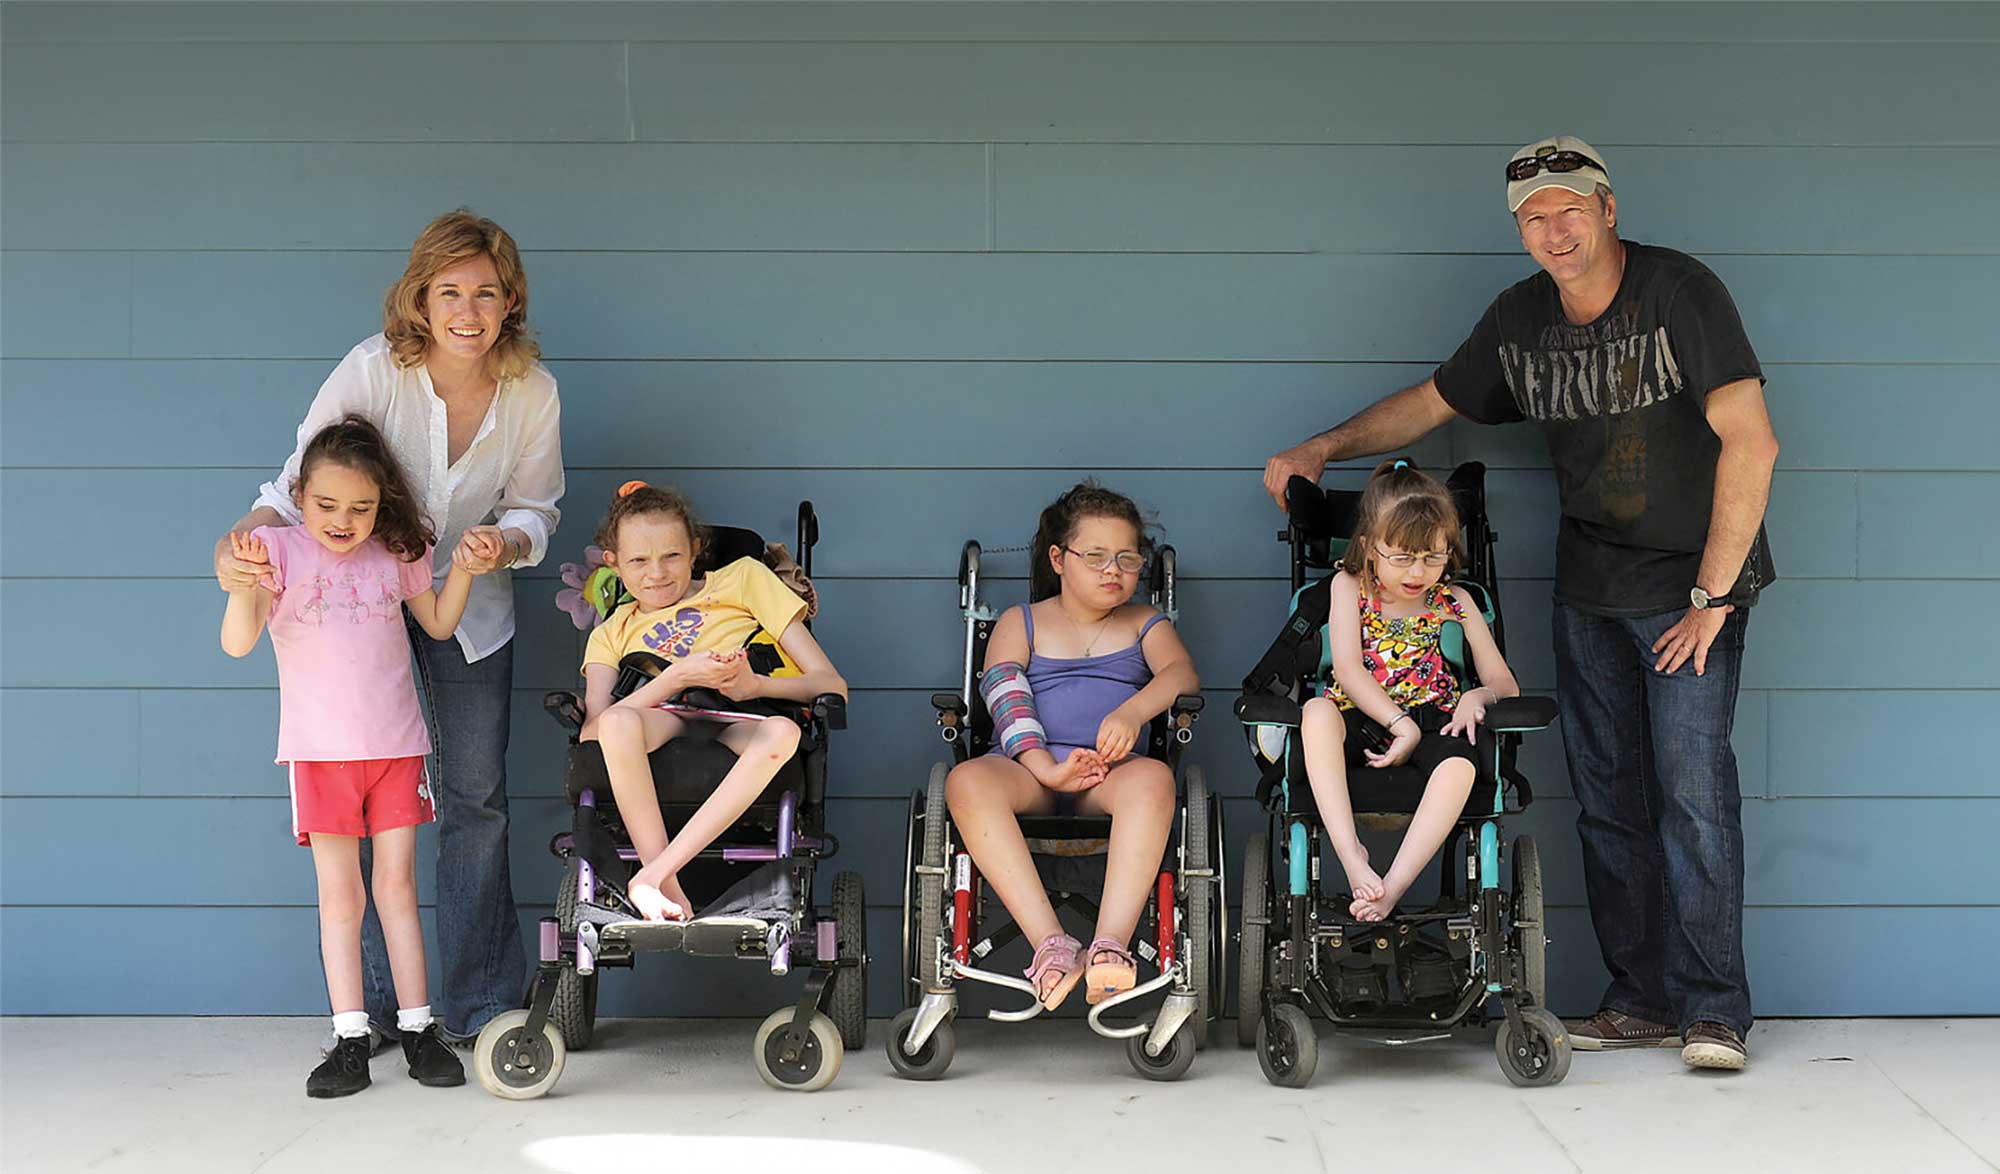 A group, including children in wheelchairs, looking at the camera